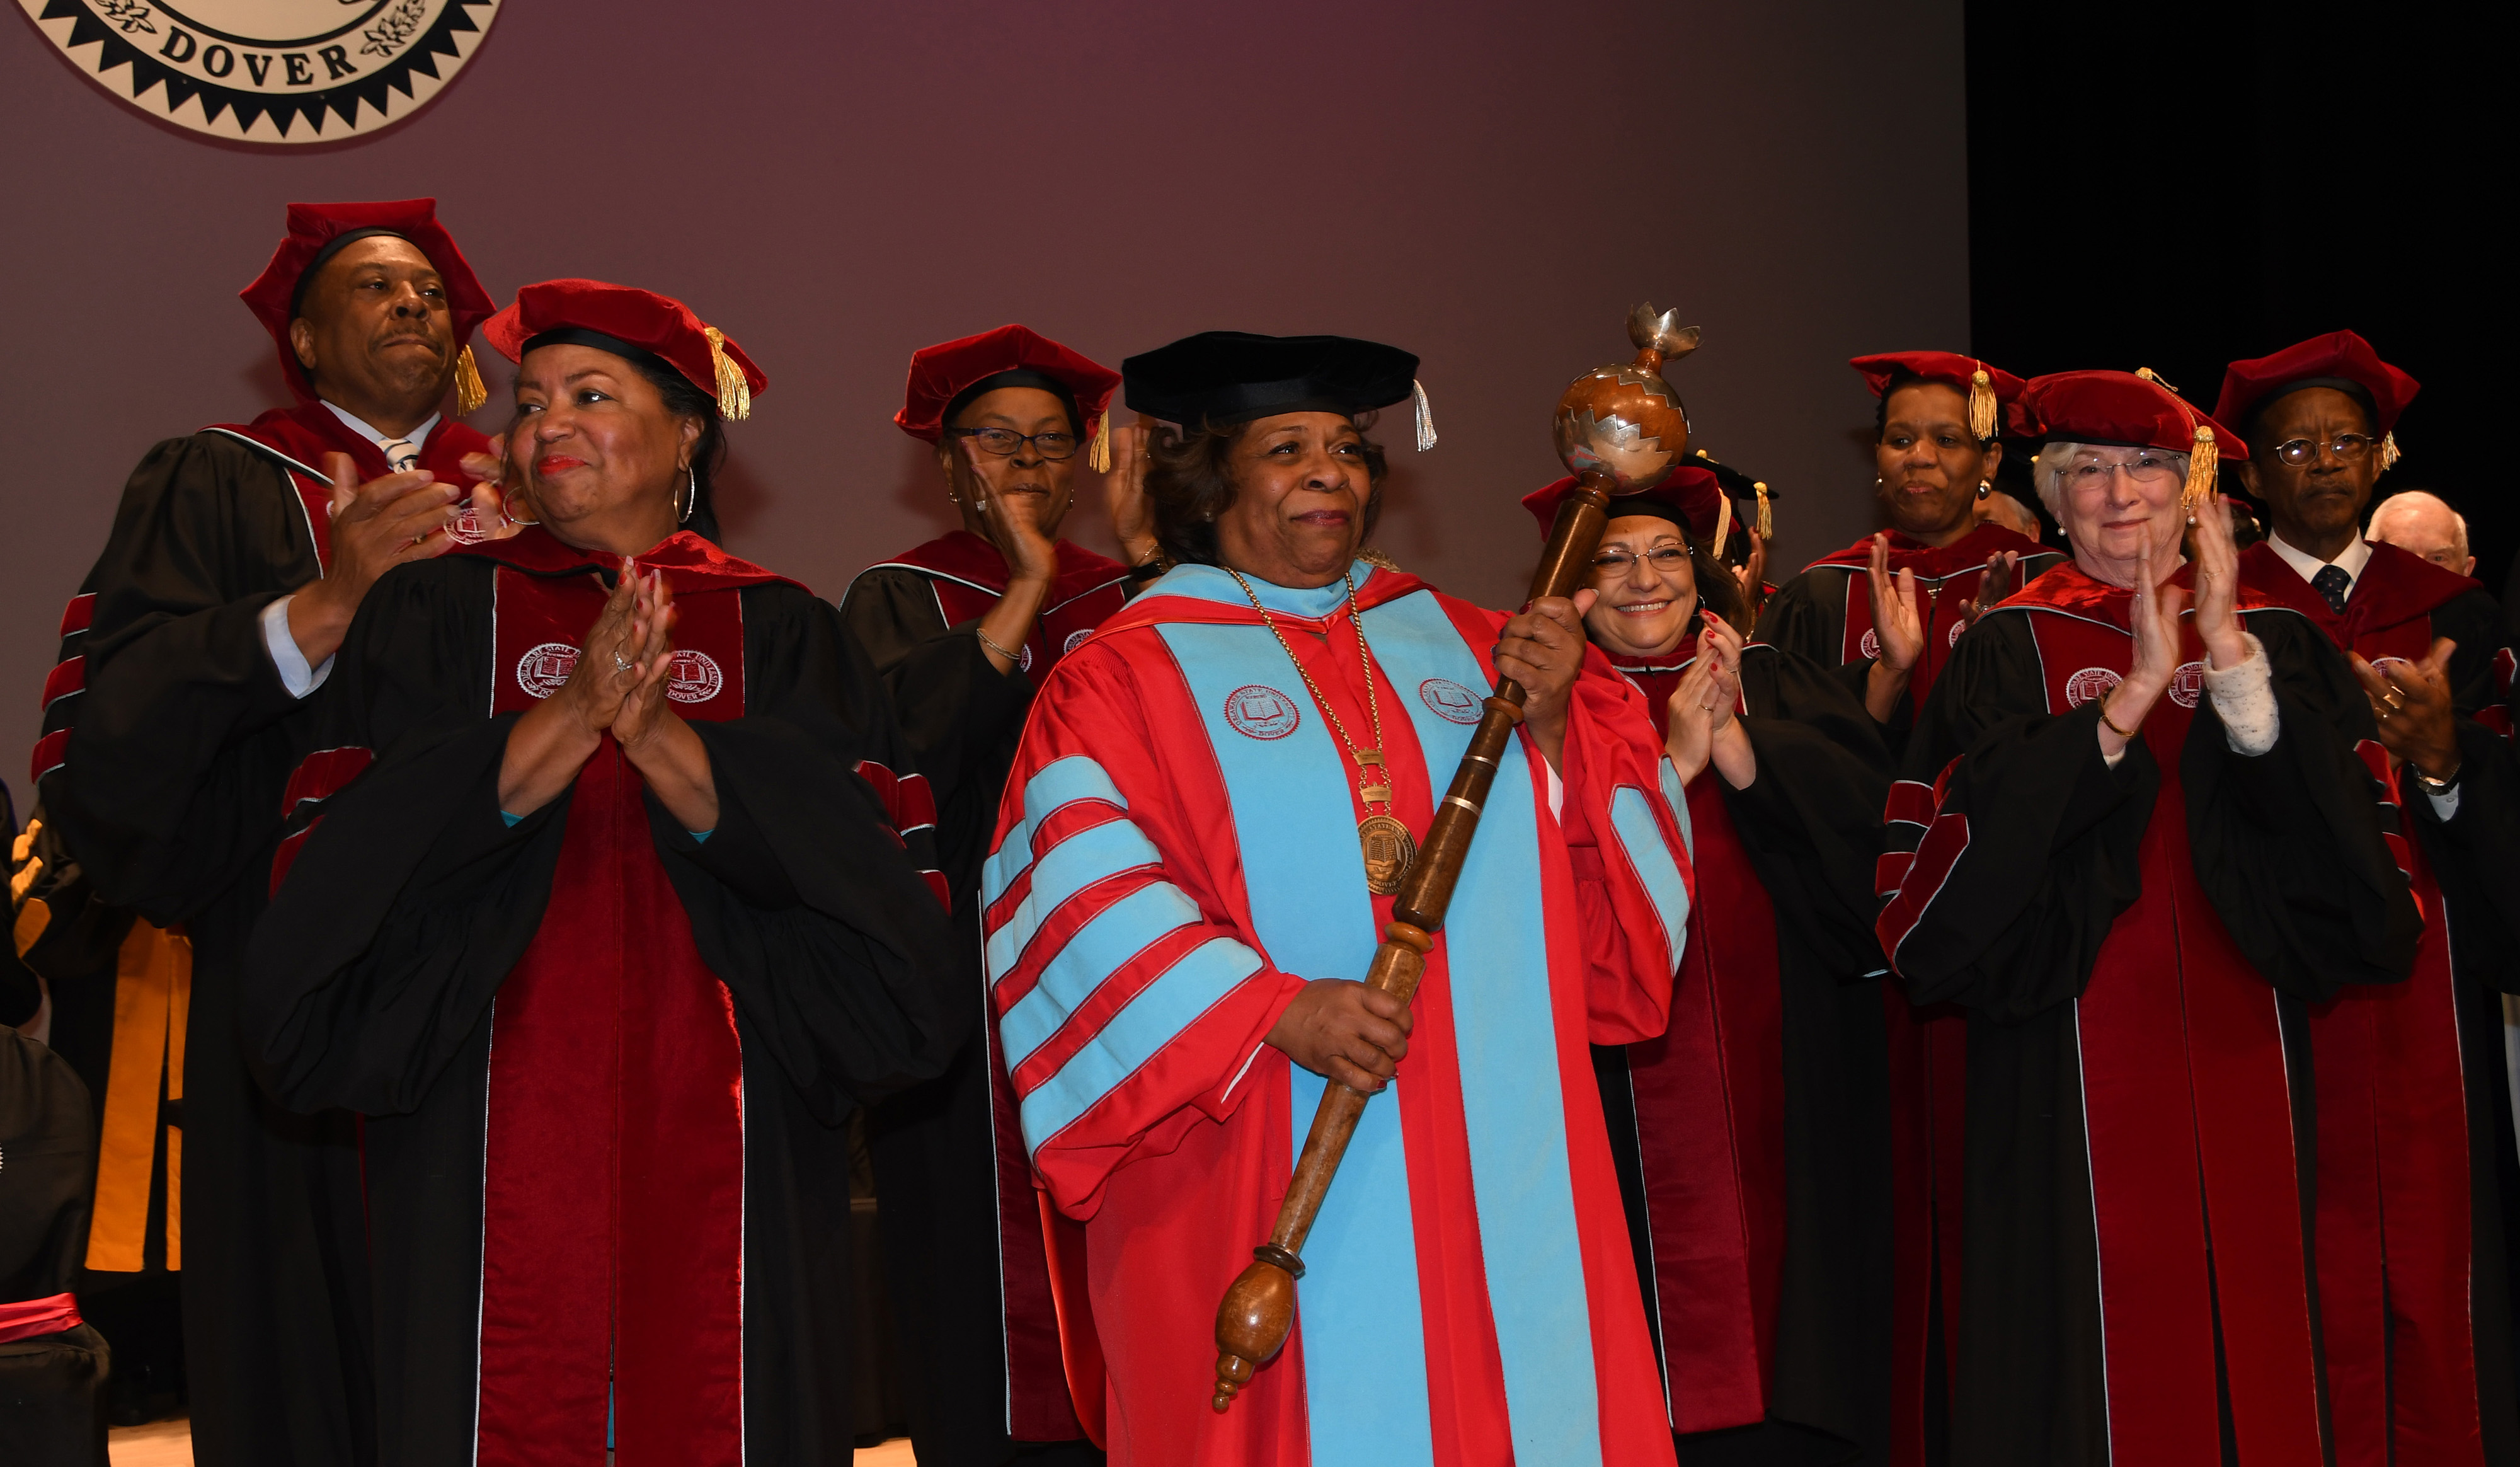 Surrounded by the University's Board of Trustees, the institution's 11th President receives the applause of all those in attendance at the Investiture Ceremony in the Education & Humanities Theatre.